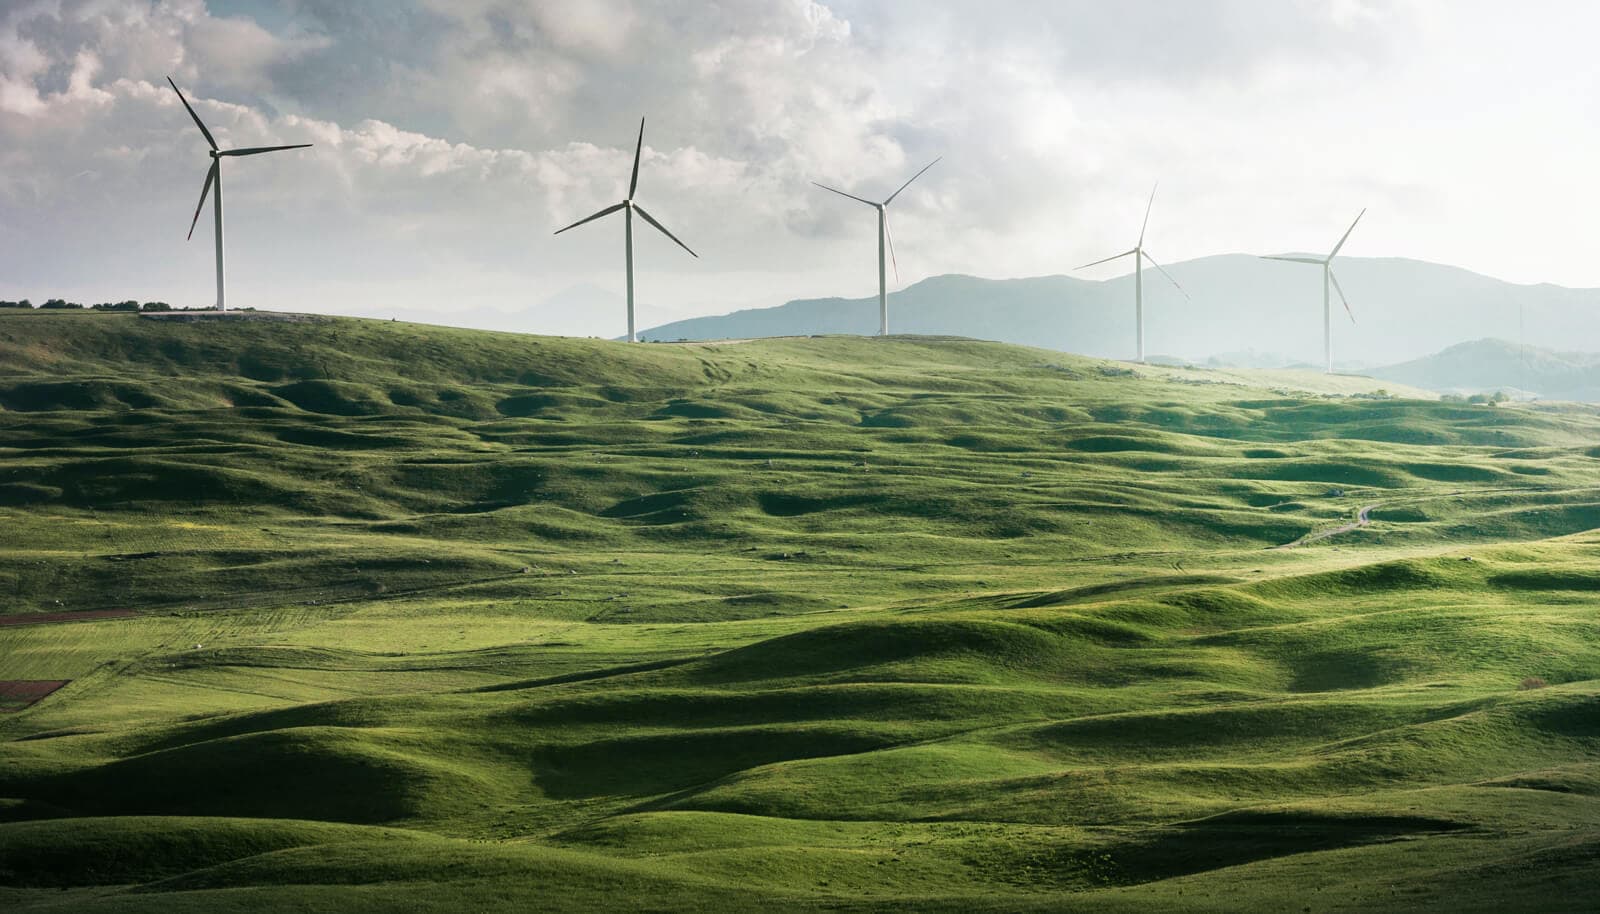 A wind farm with 6 windmills, rolling hills, and a cloudy gray sky in the background.